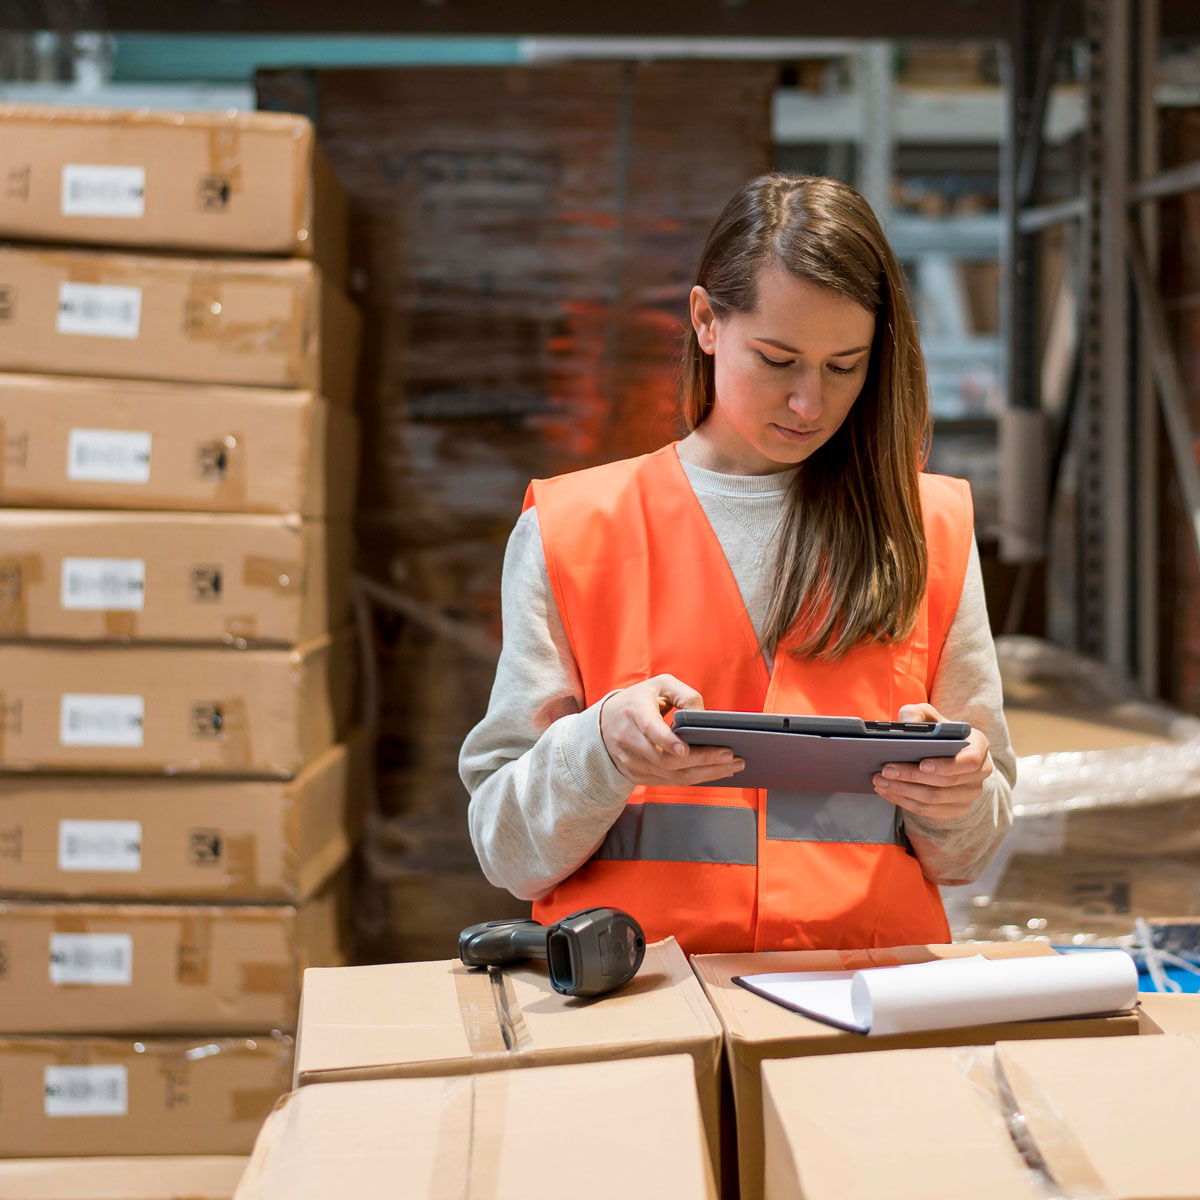 Postal Female Warehouse Worker With Tablet